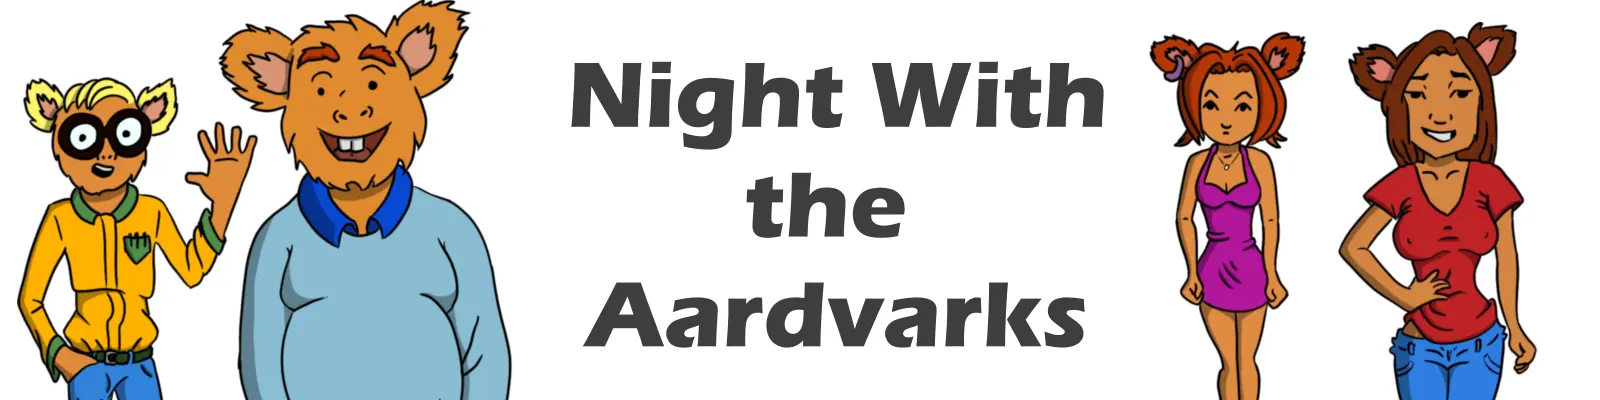 Night with the Aardvarks main image